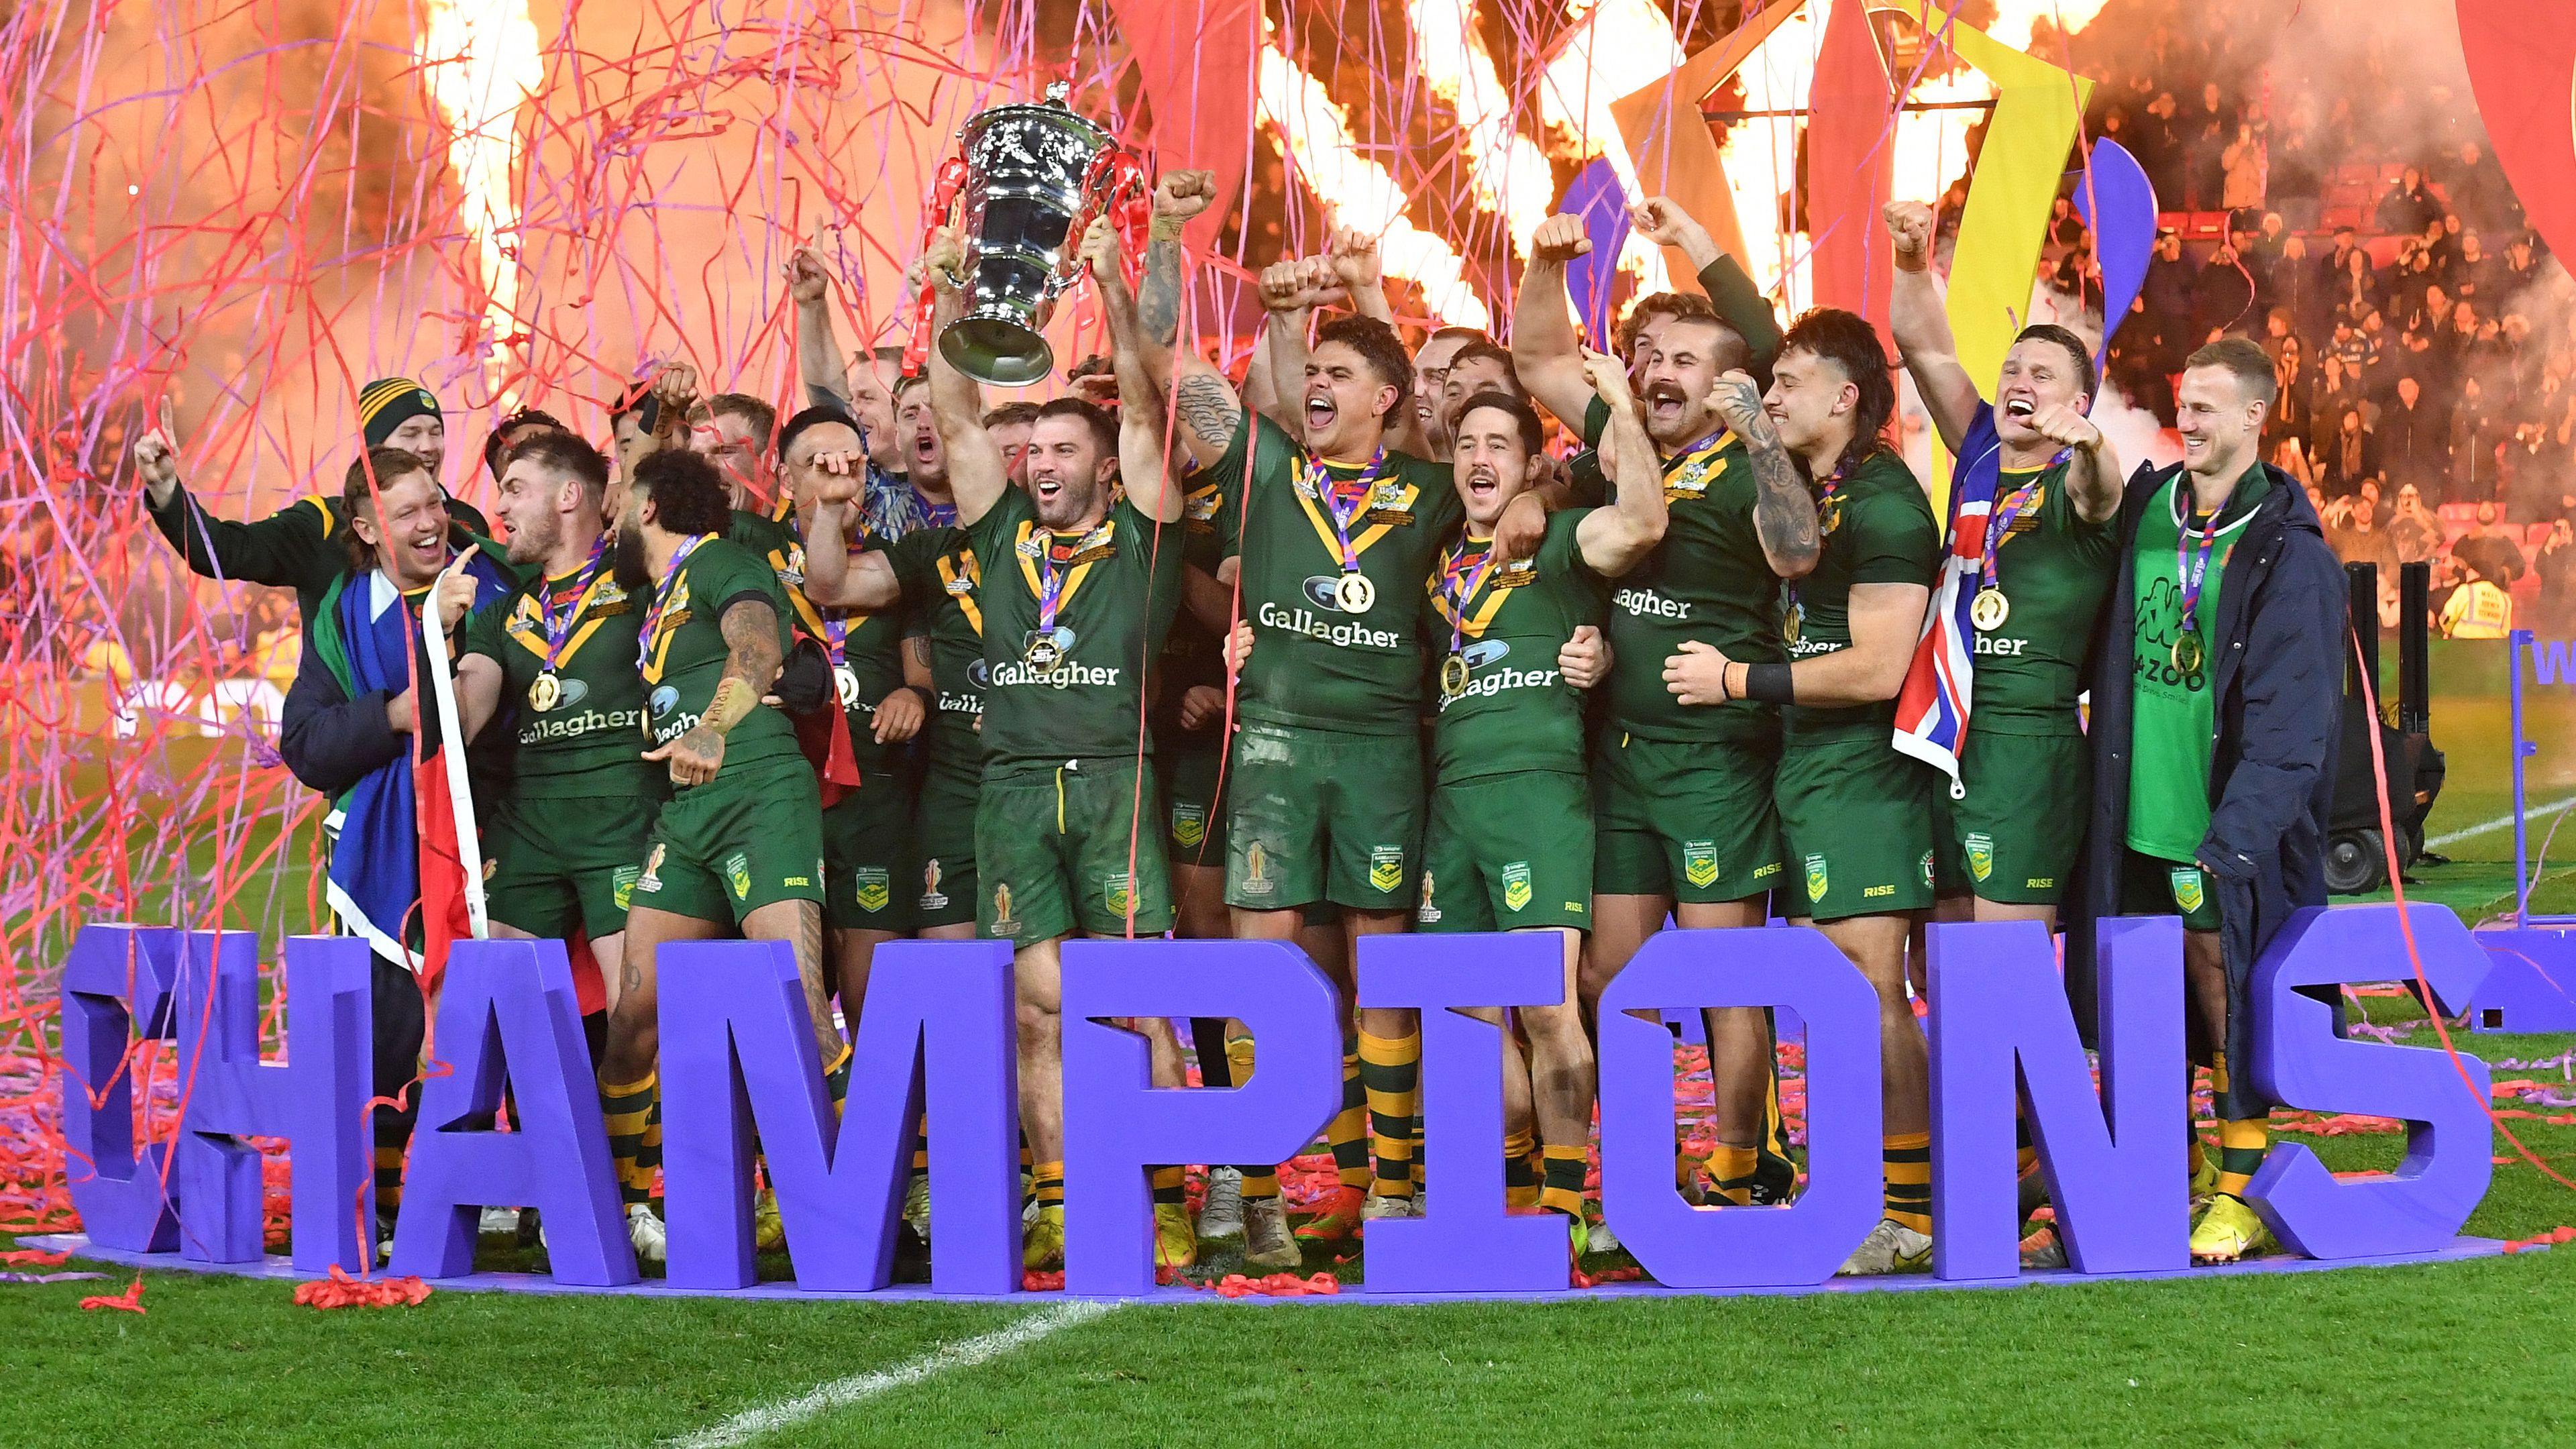 Australia retain their World Champions status the Rugby League World Cup Final match between Australia and Samoa at Old Trafford on November 19, 2022 in Manchester, England. (Photo by Dave Howarth - CameraSport via Getty Images)